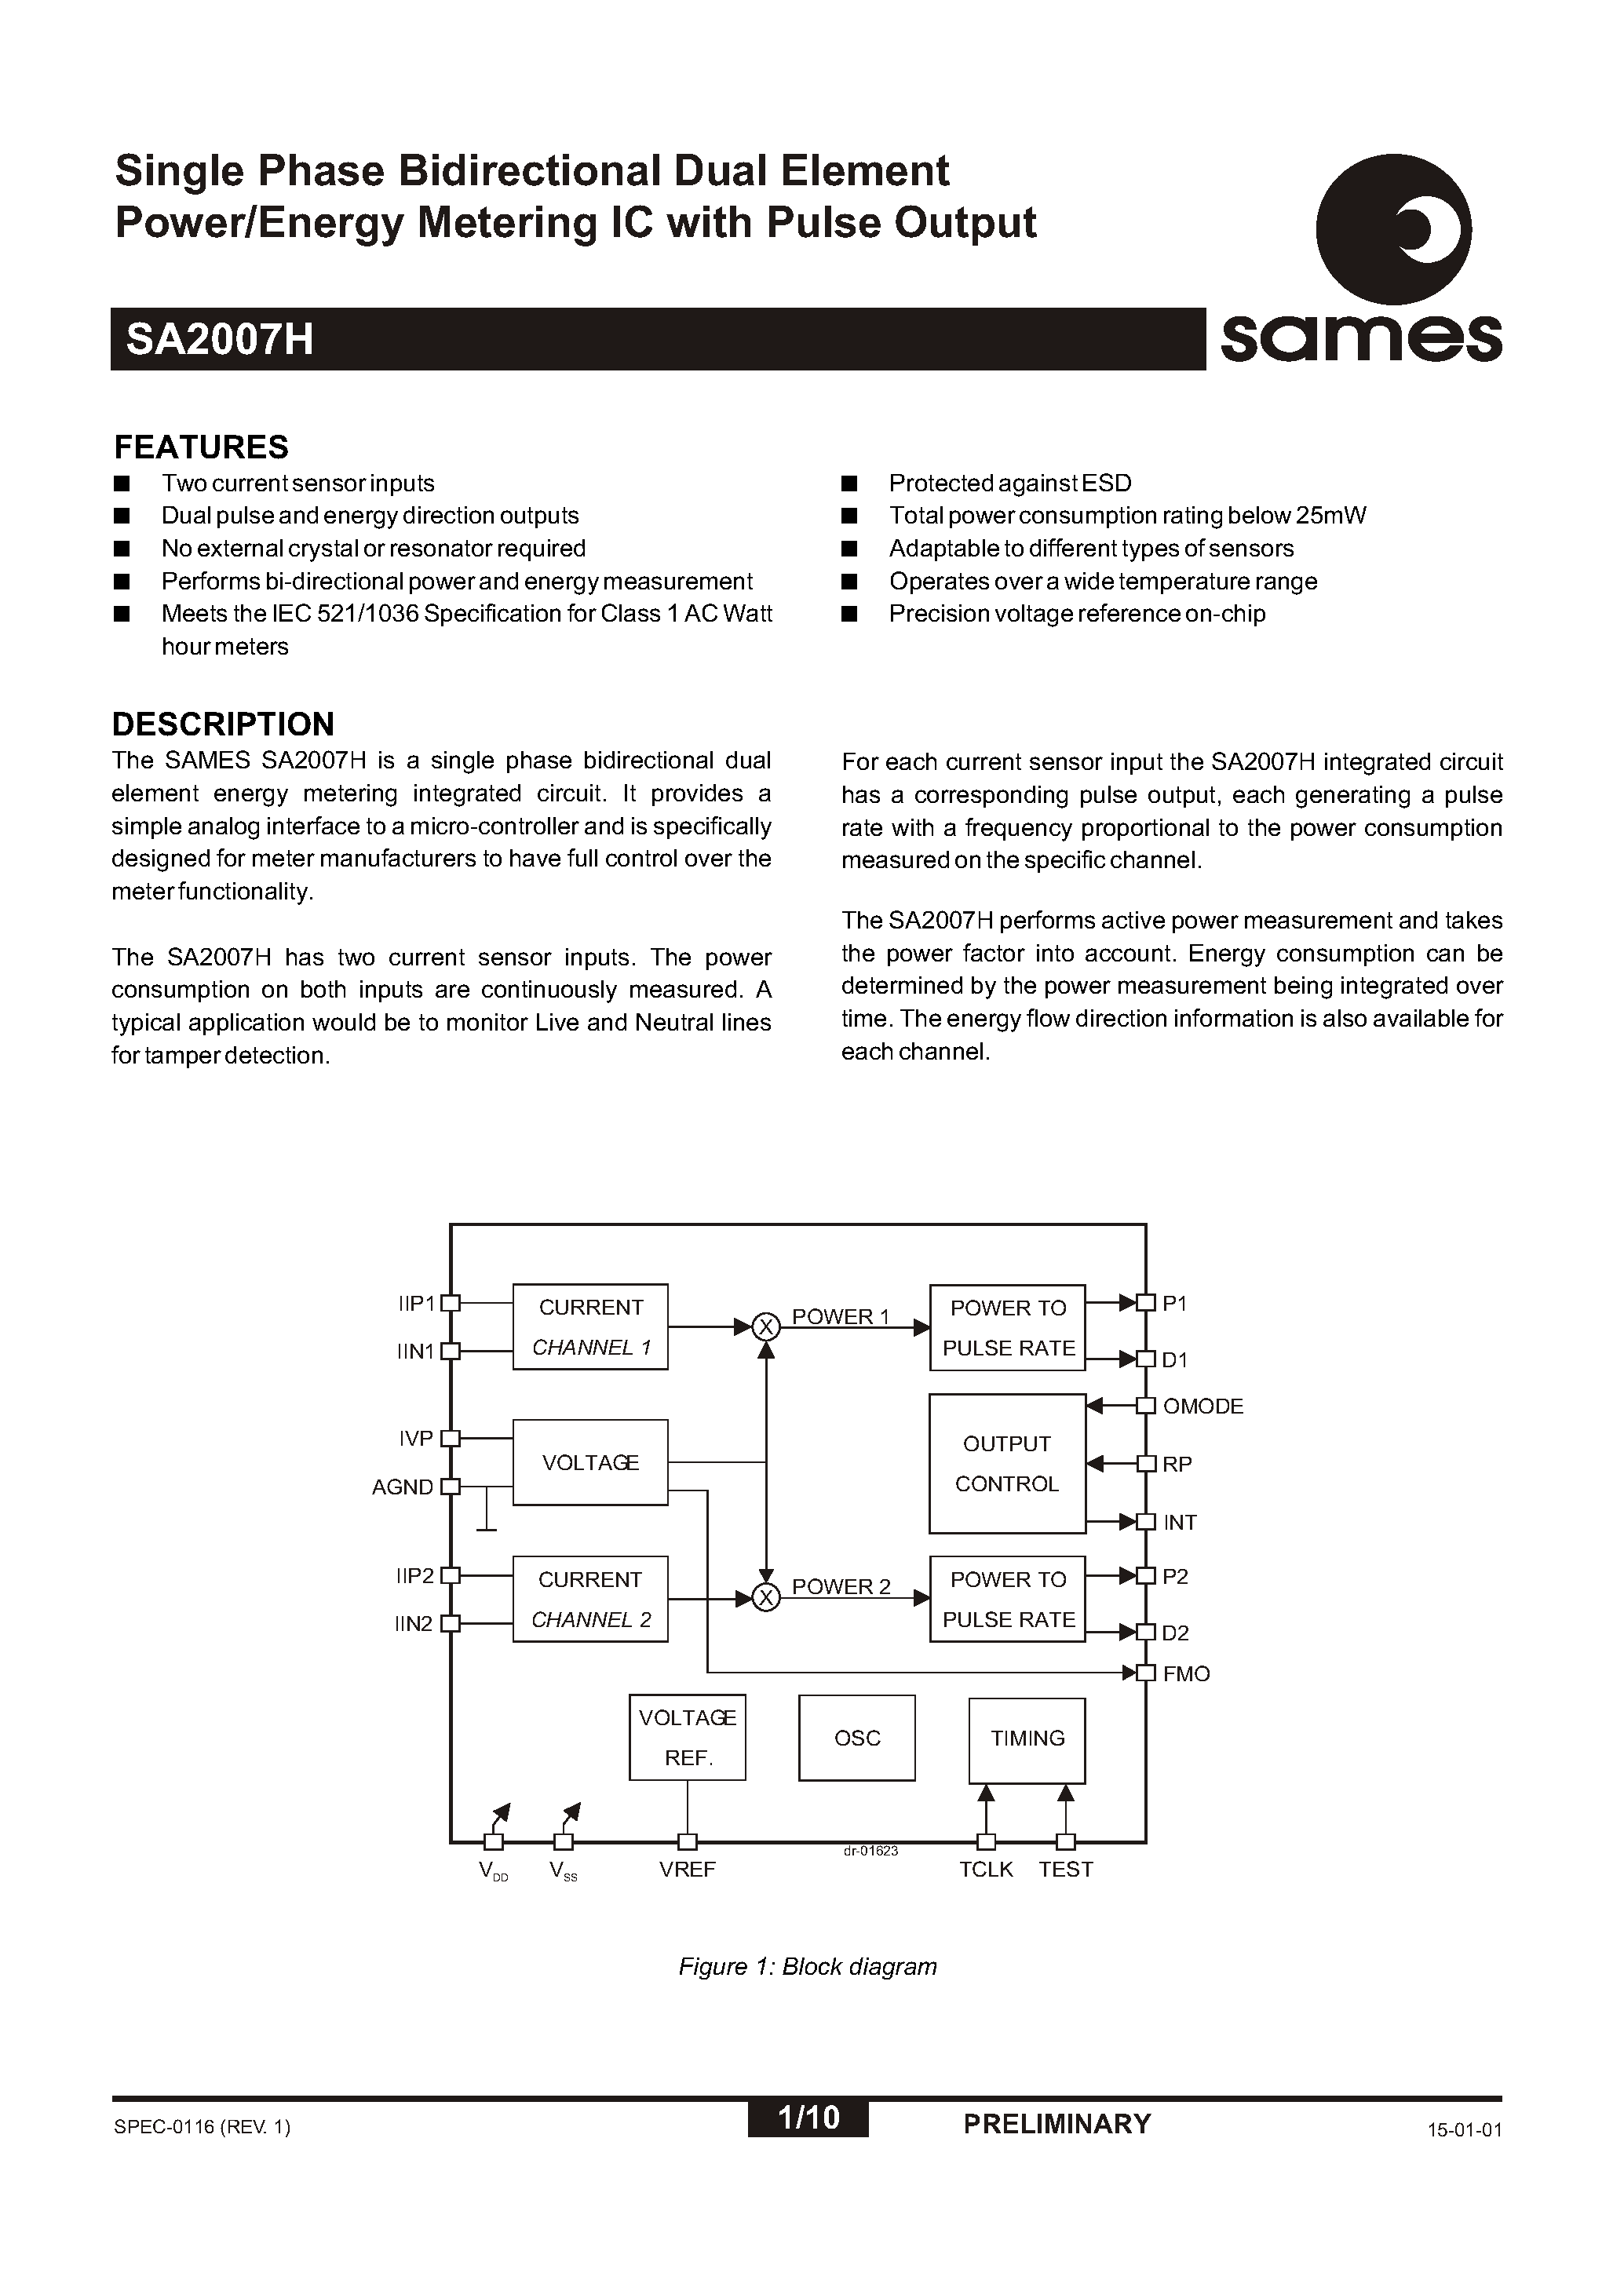 Datasheet SA2007HPA - Single Phase Bidirectional Dual Element Power/Energy Metering IC with Pulse Output page 1